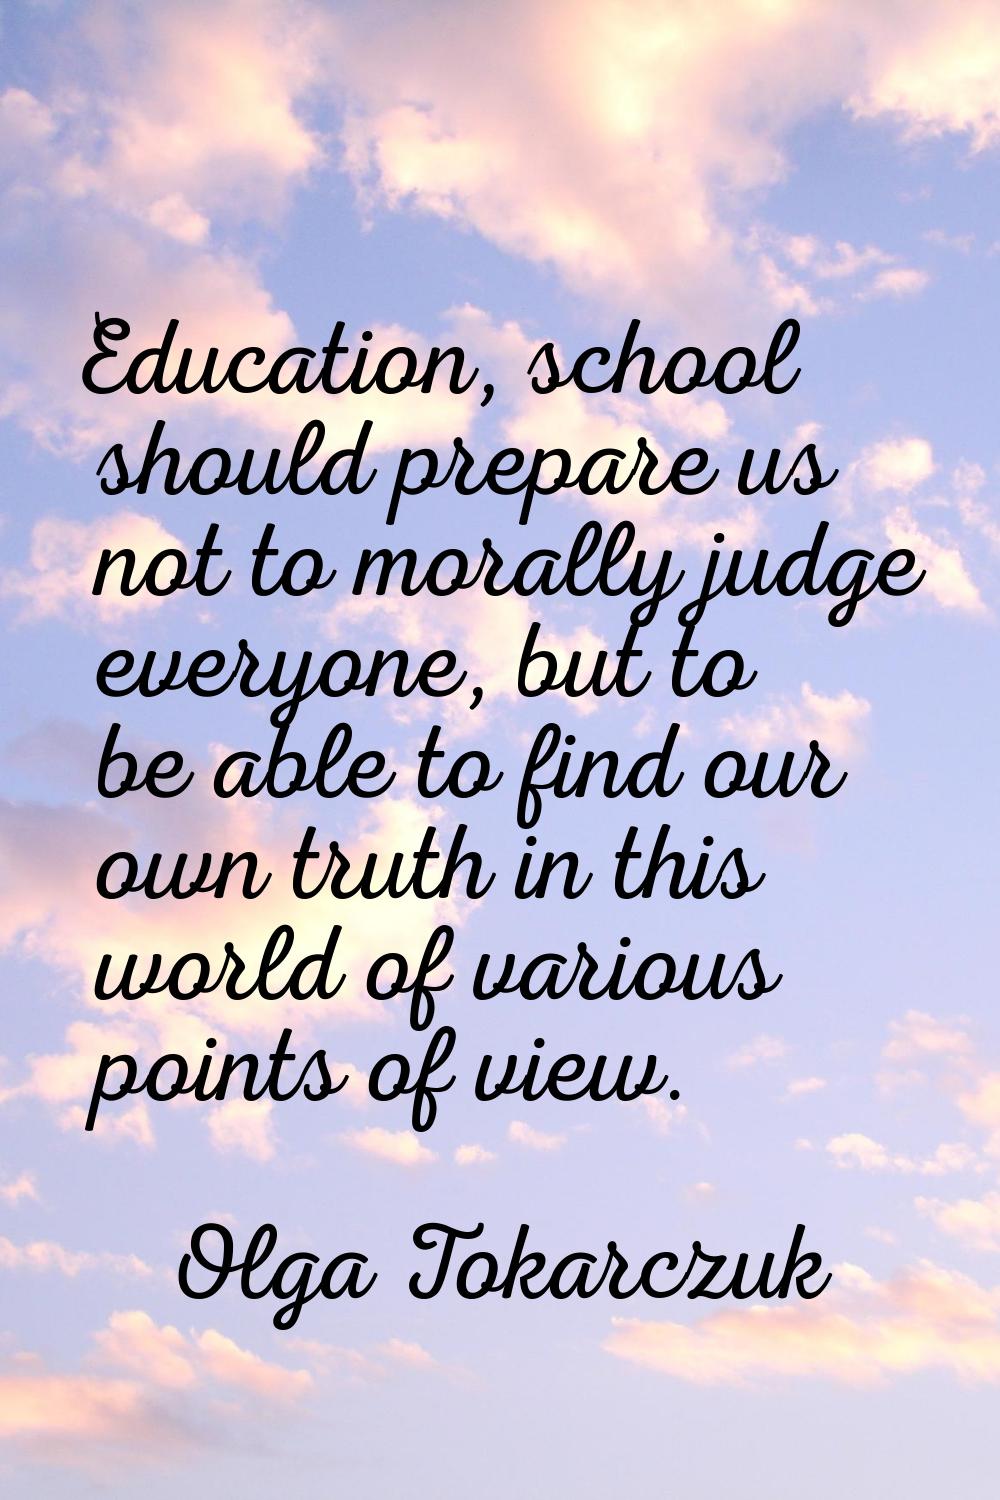 Education, school should prepare us not to morally judge everyone, but to be able to find our own t